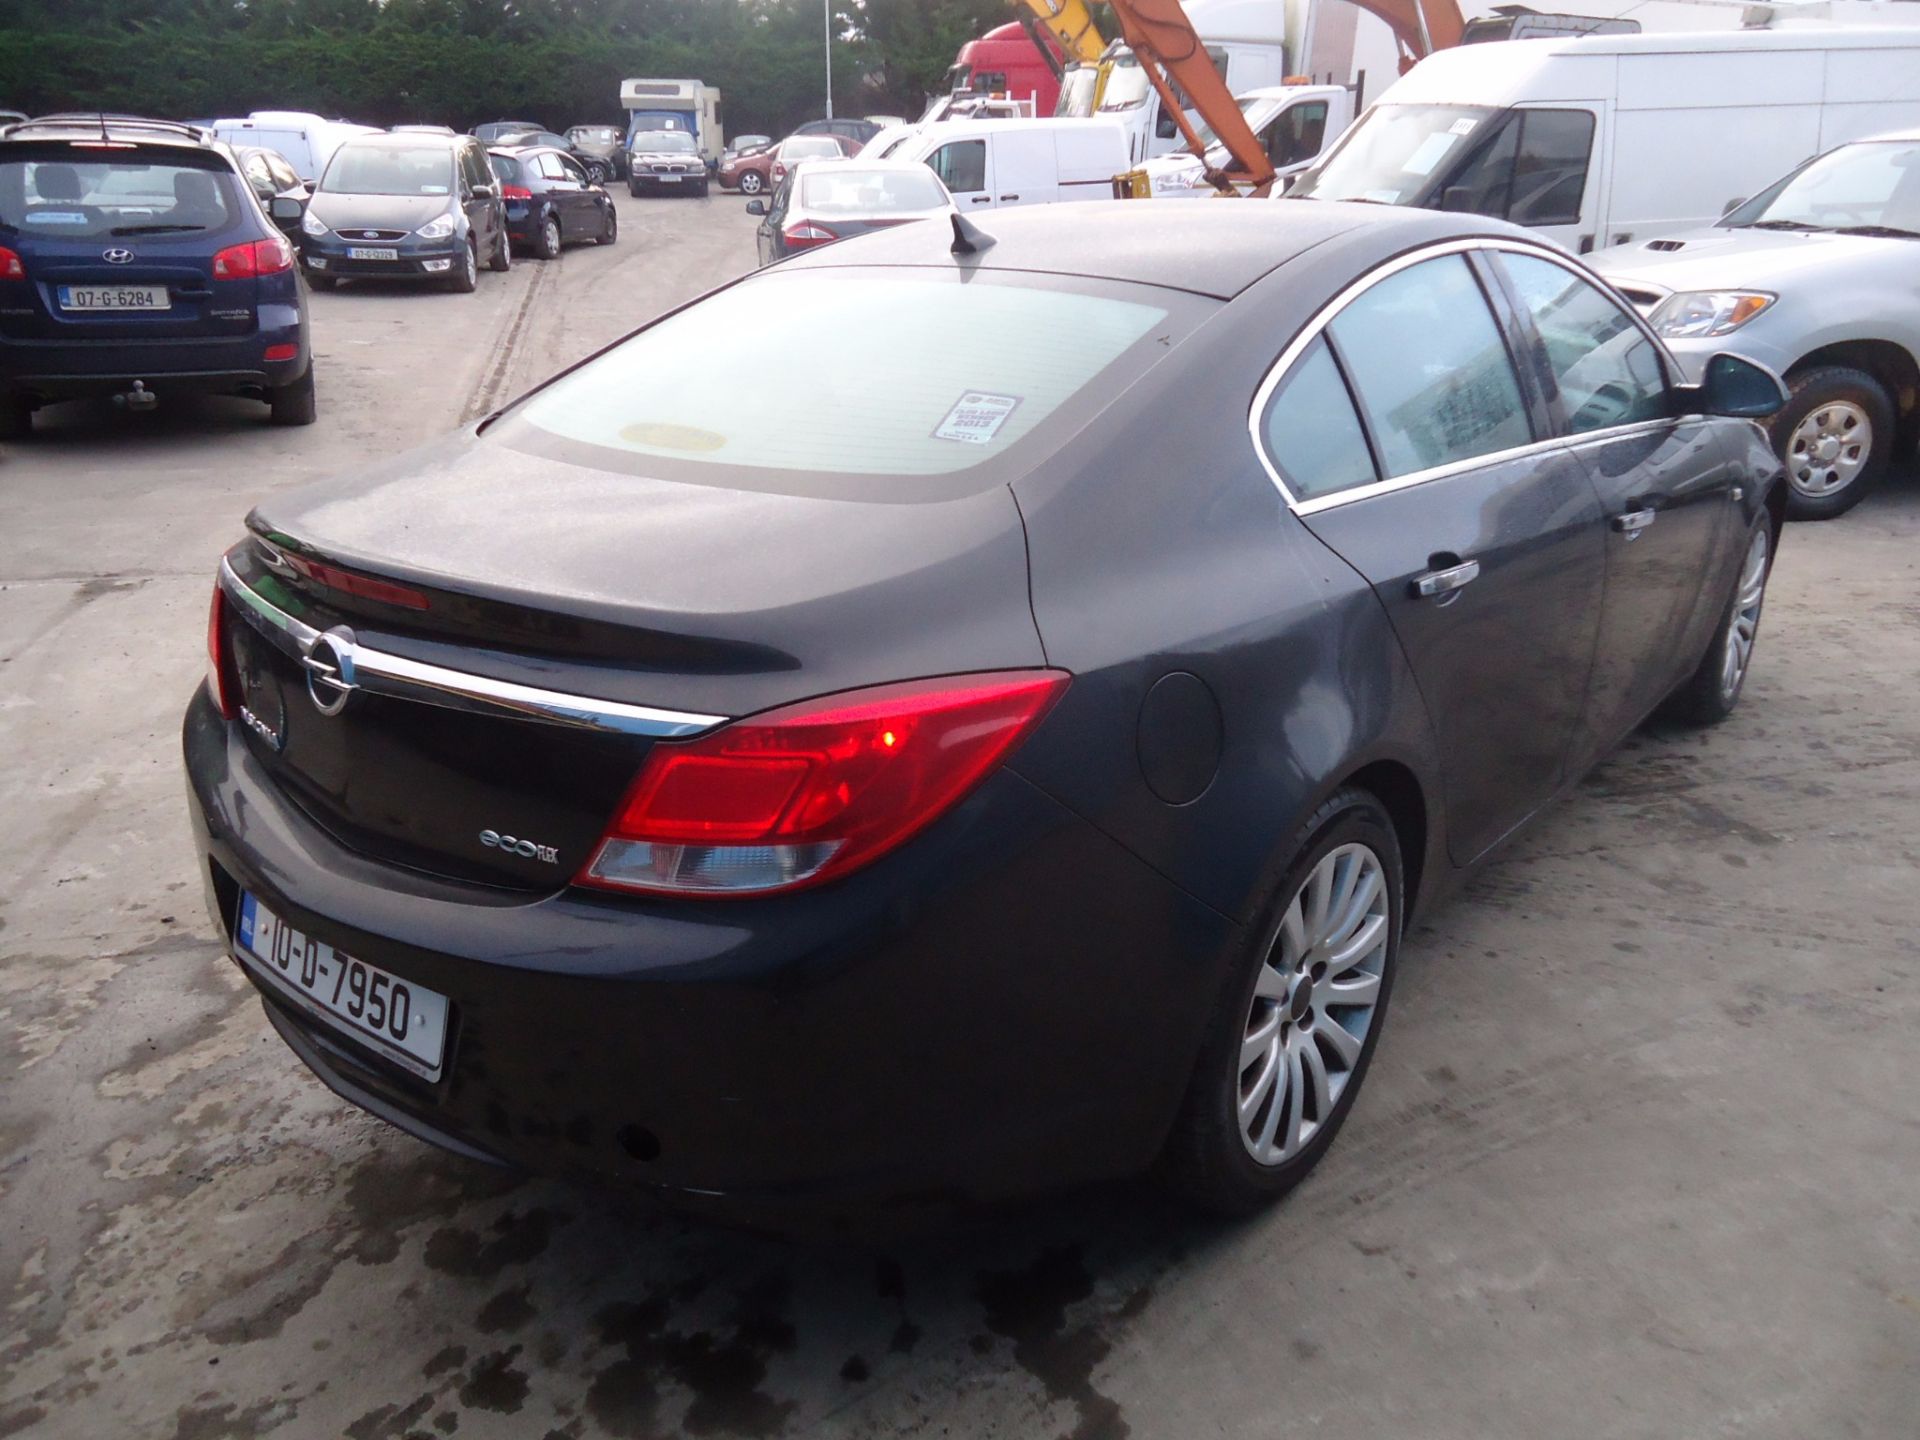 10D7950 Opel Insignia - Image 3 of 6